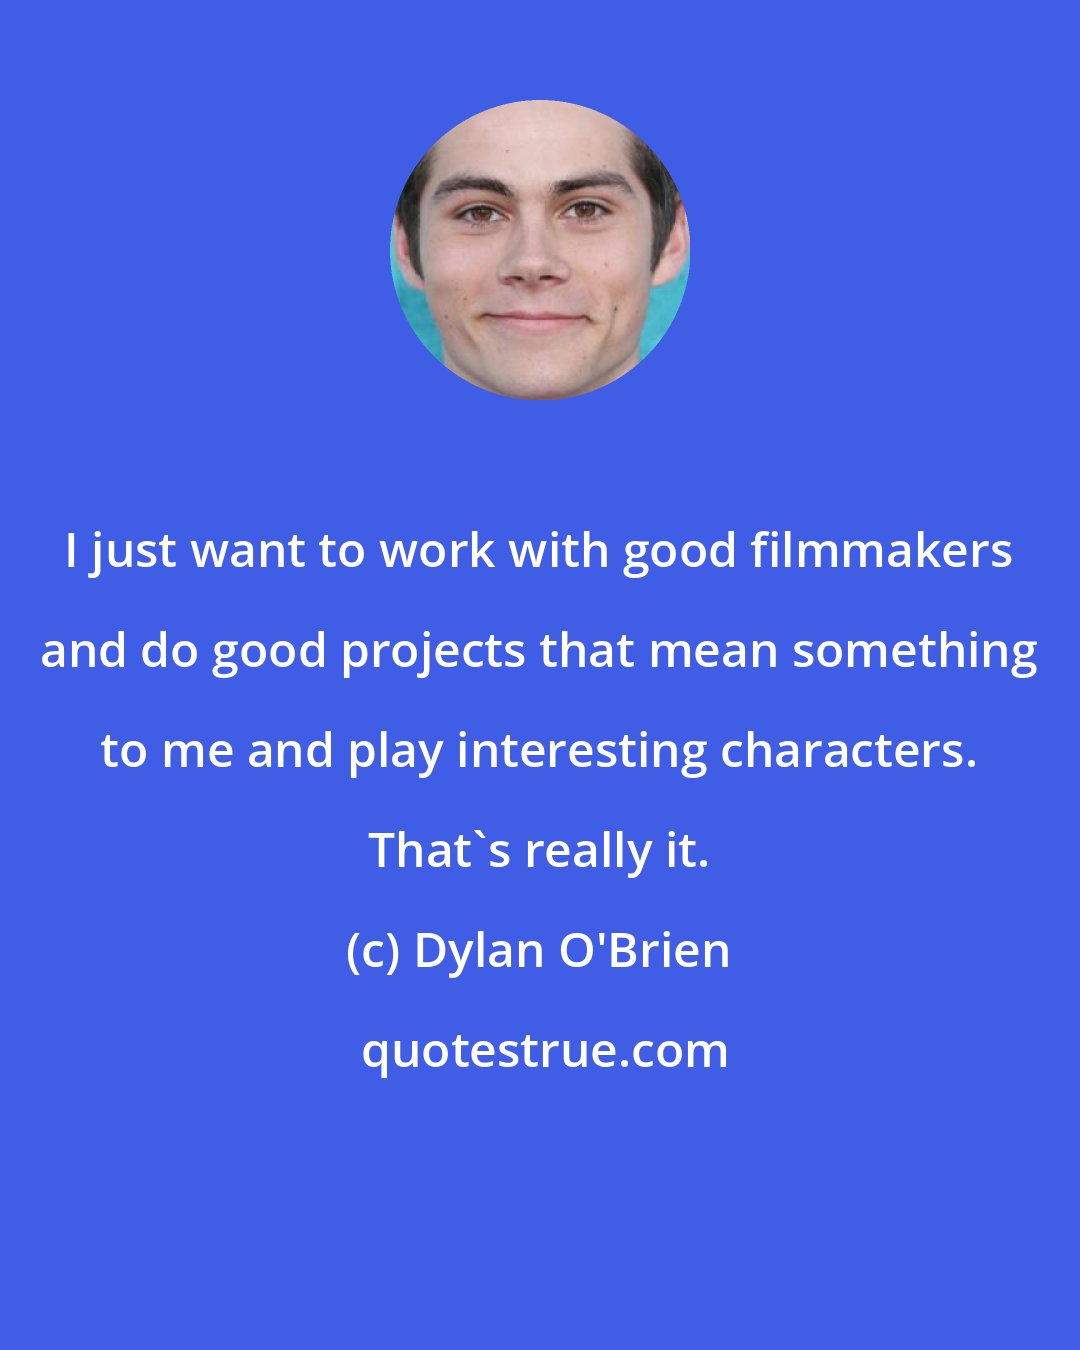 Dylan O'Brien: I just want to work with good filmmakers and do good projects that mean something to me and play interesting characters. That's really it.